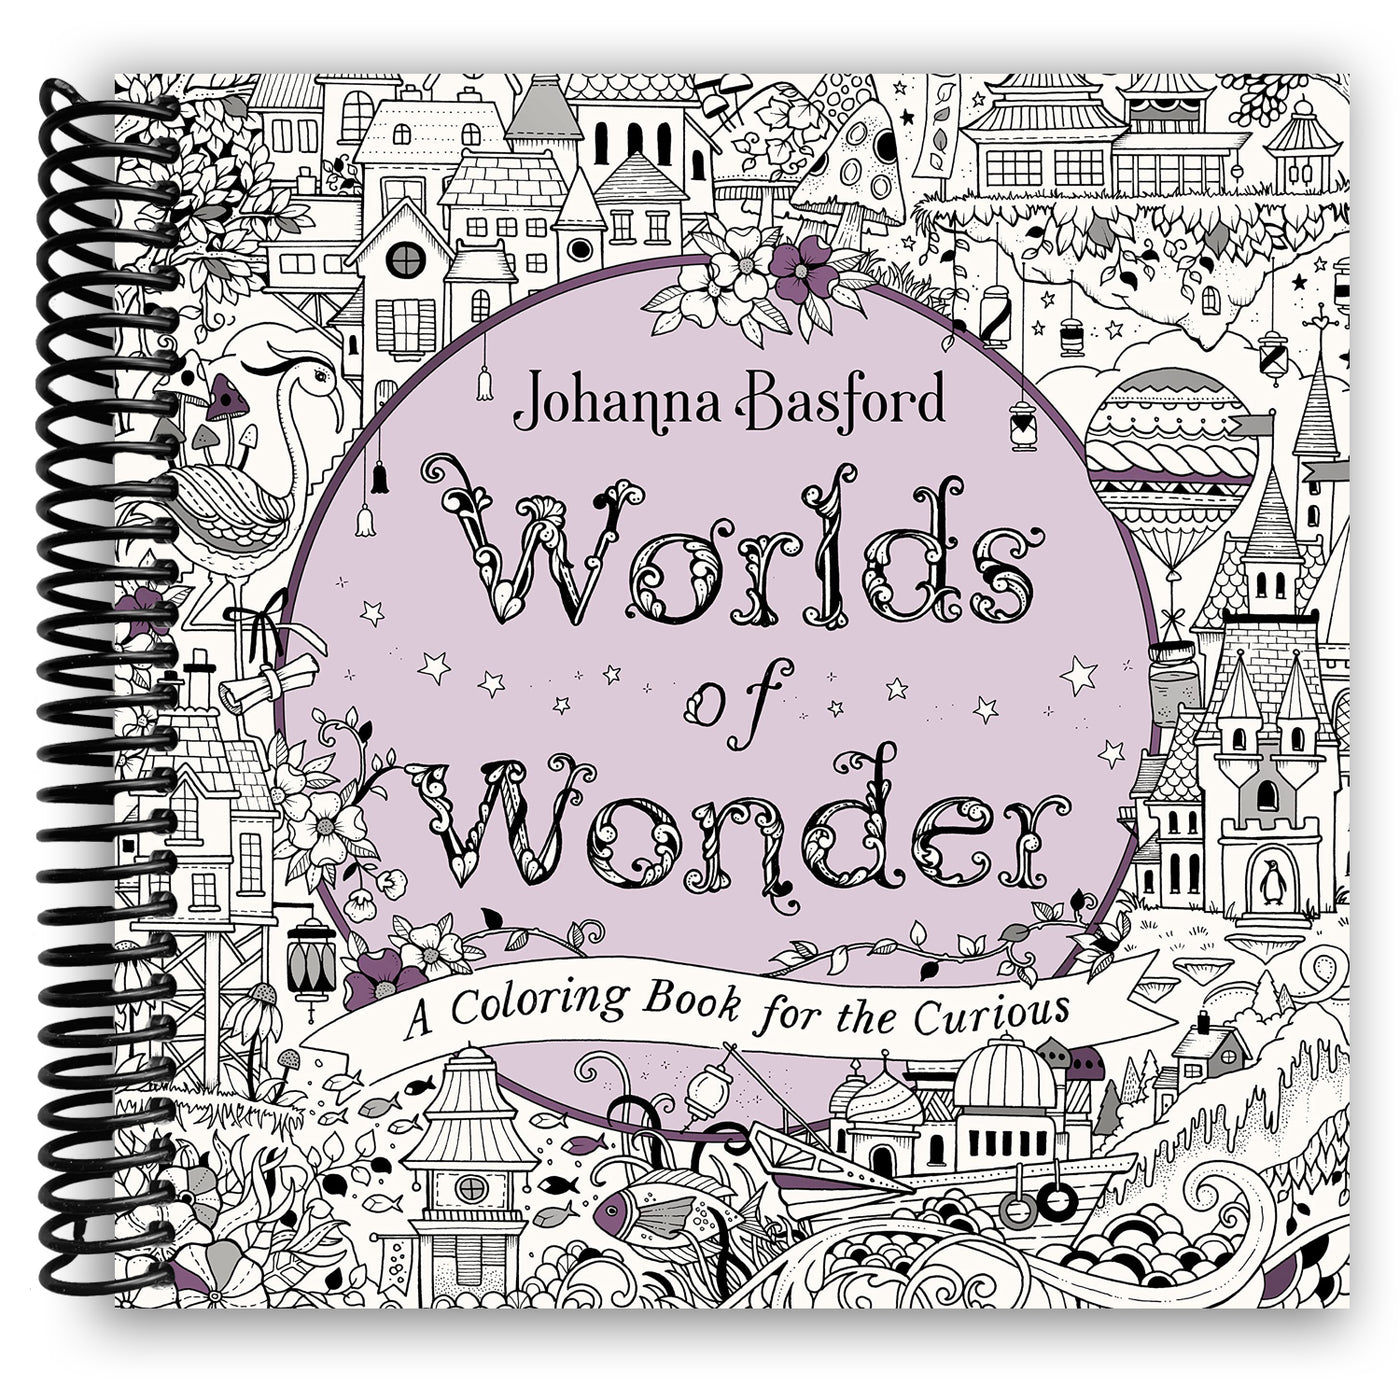 Worlds of Wonder: A Coloring Book for the Curious (Spiral Bound)